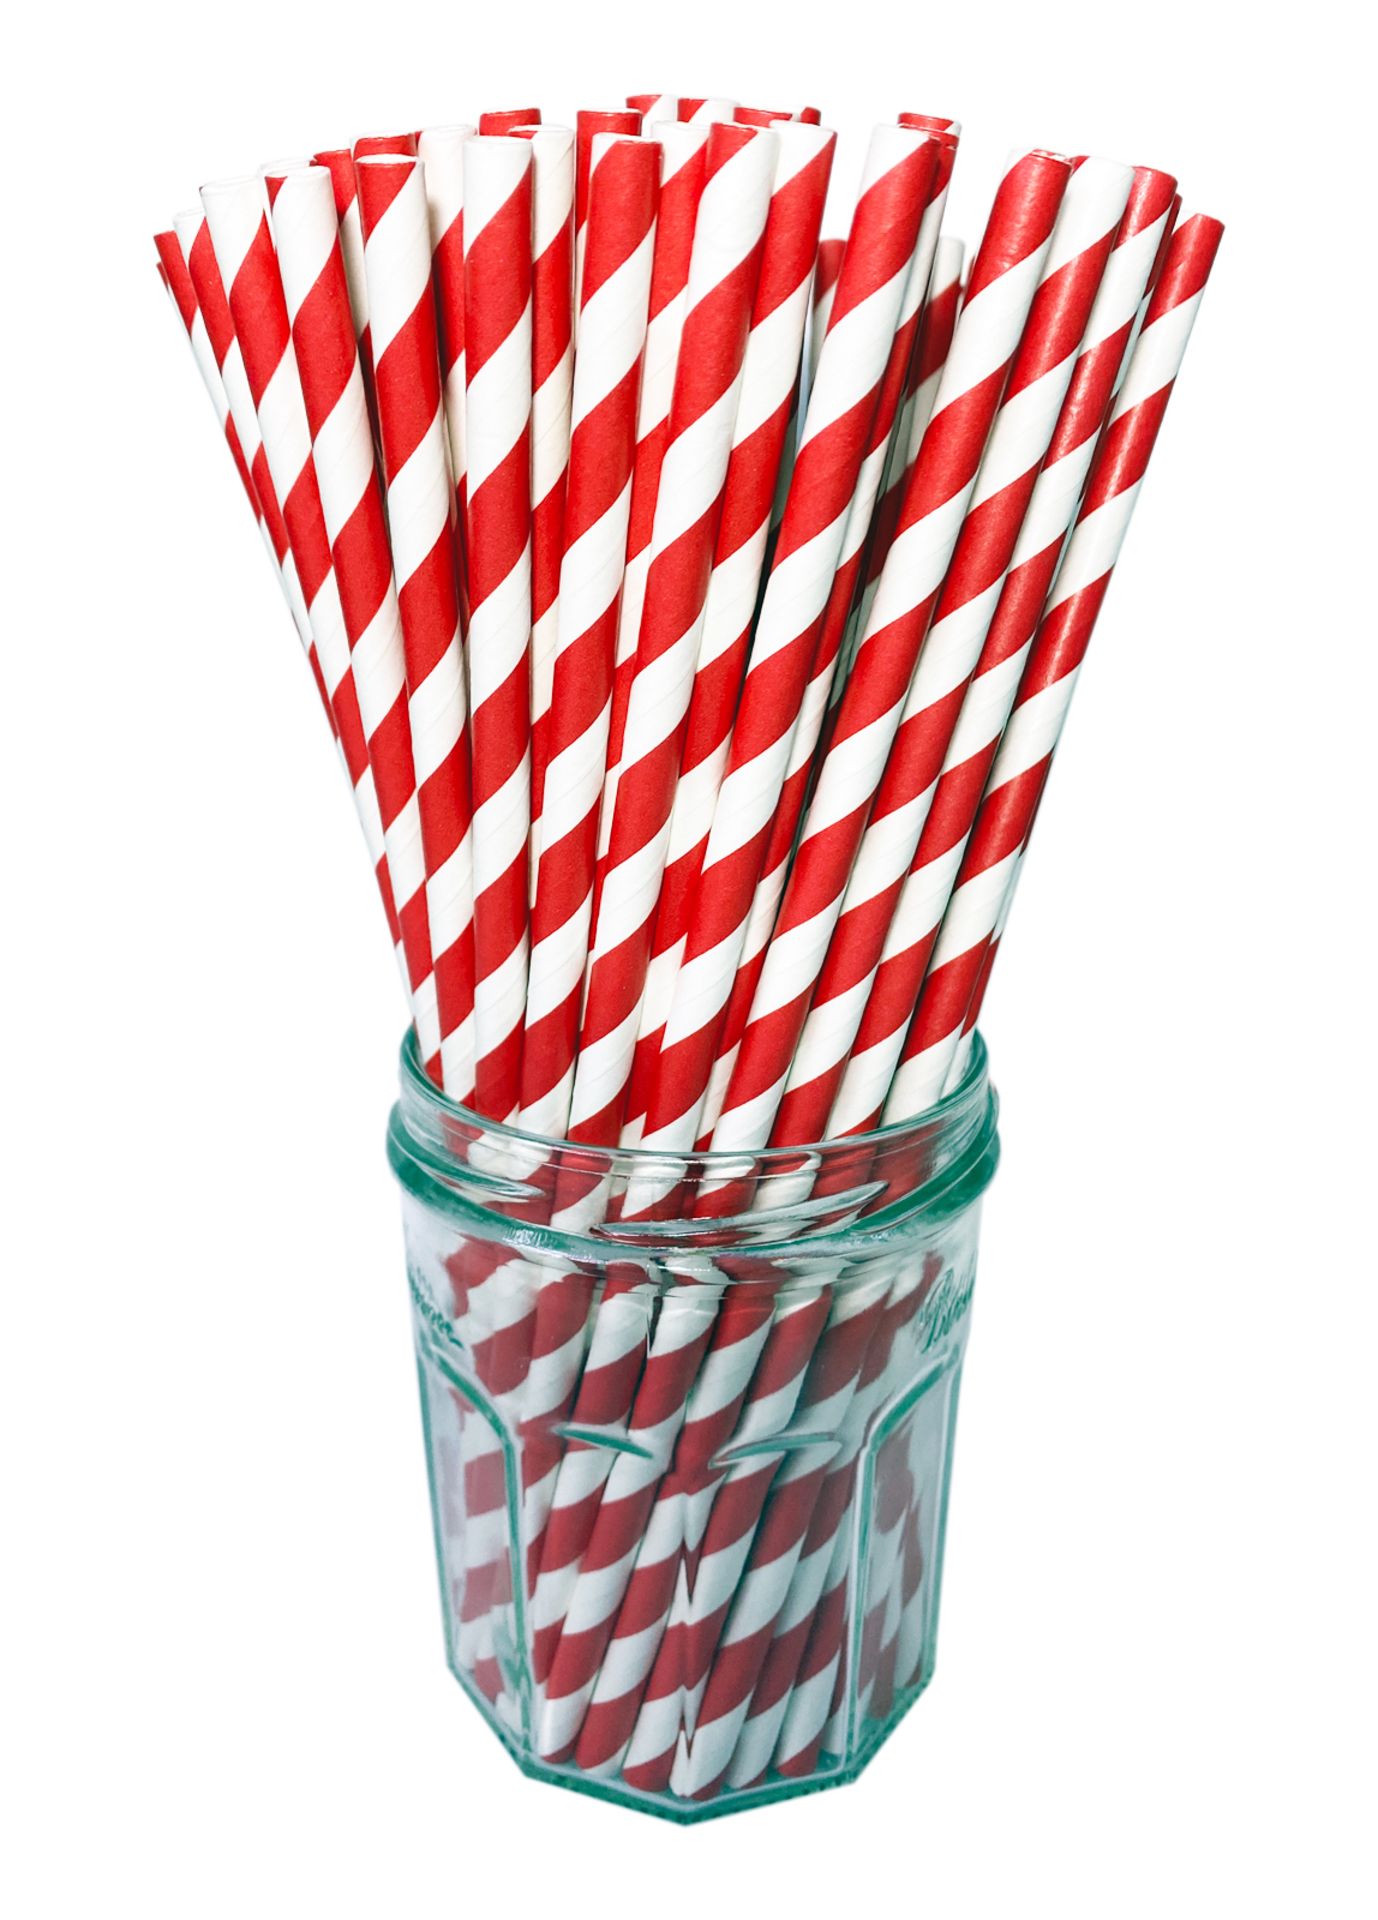 1 x Box of Candy Twist Paper Straws by 888 Gastro Disposables